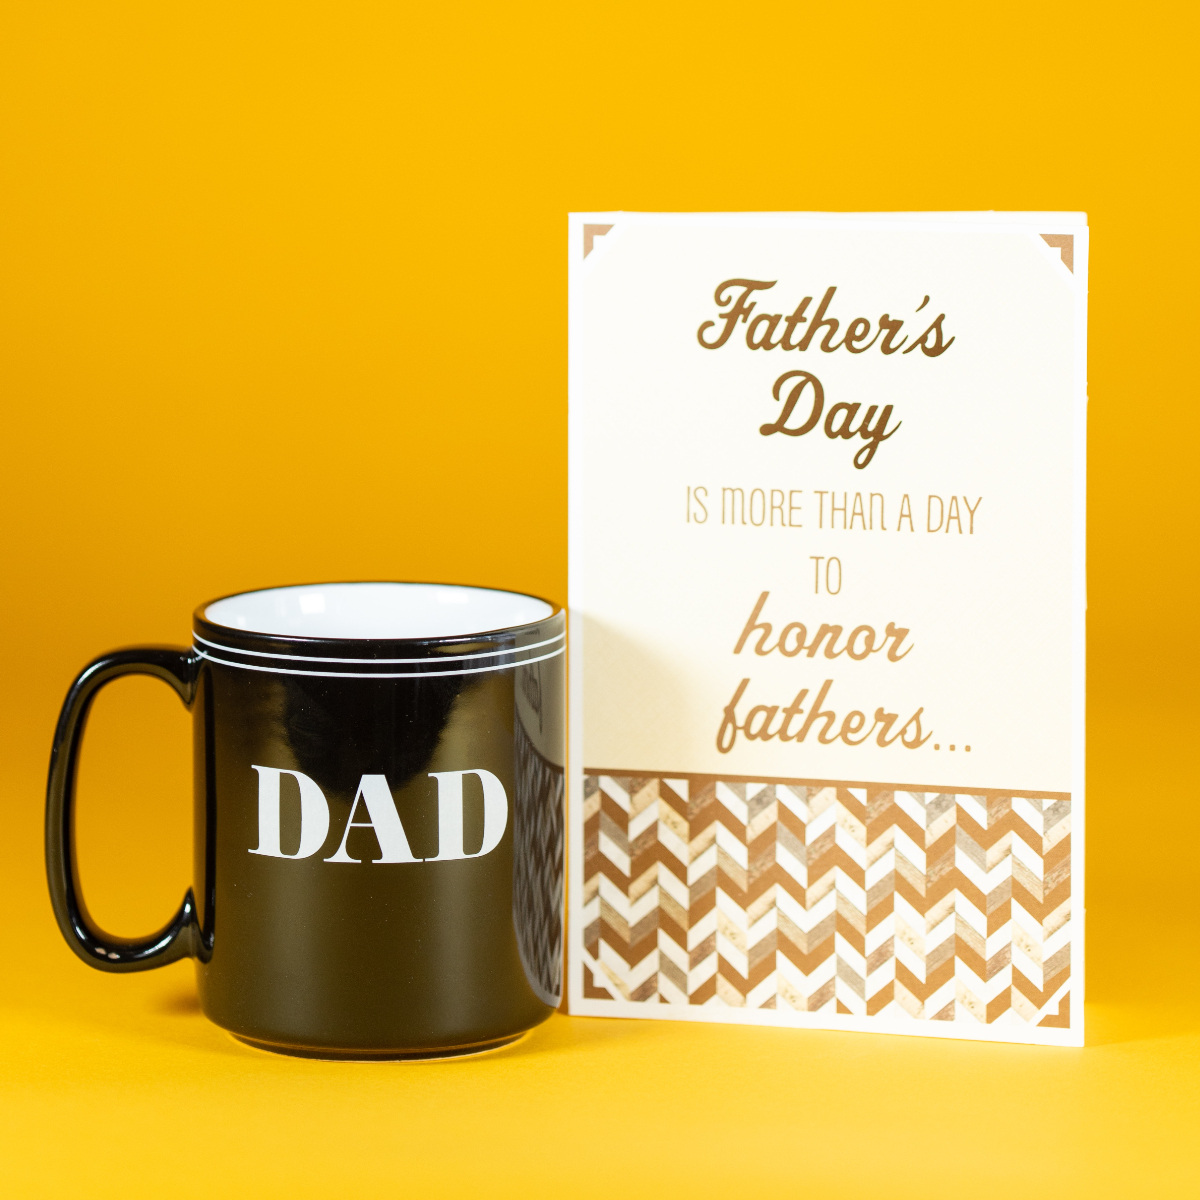 7 Father's Day gifts for single dads who do it all so effortlessly